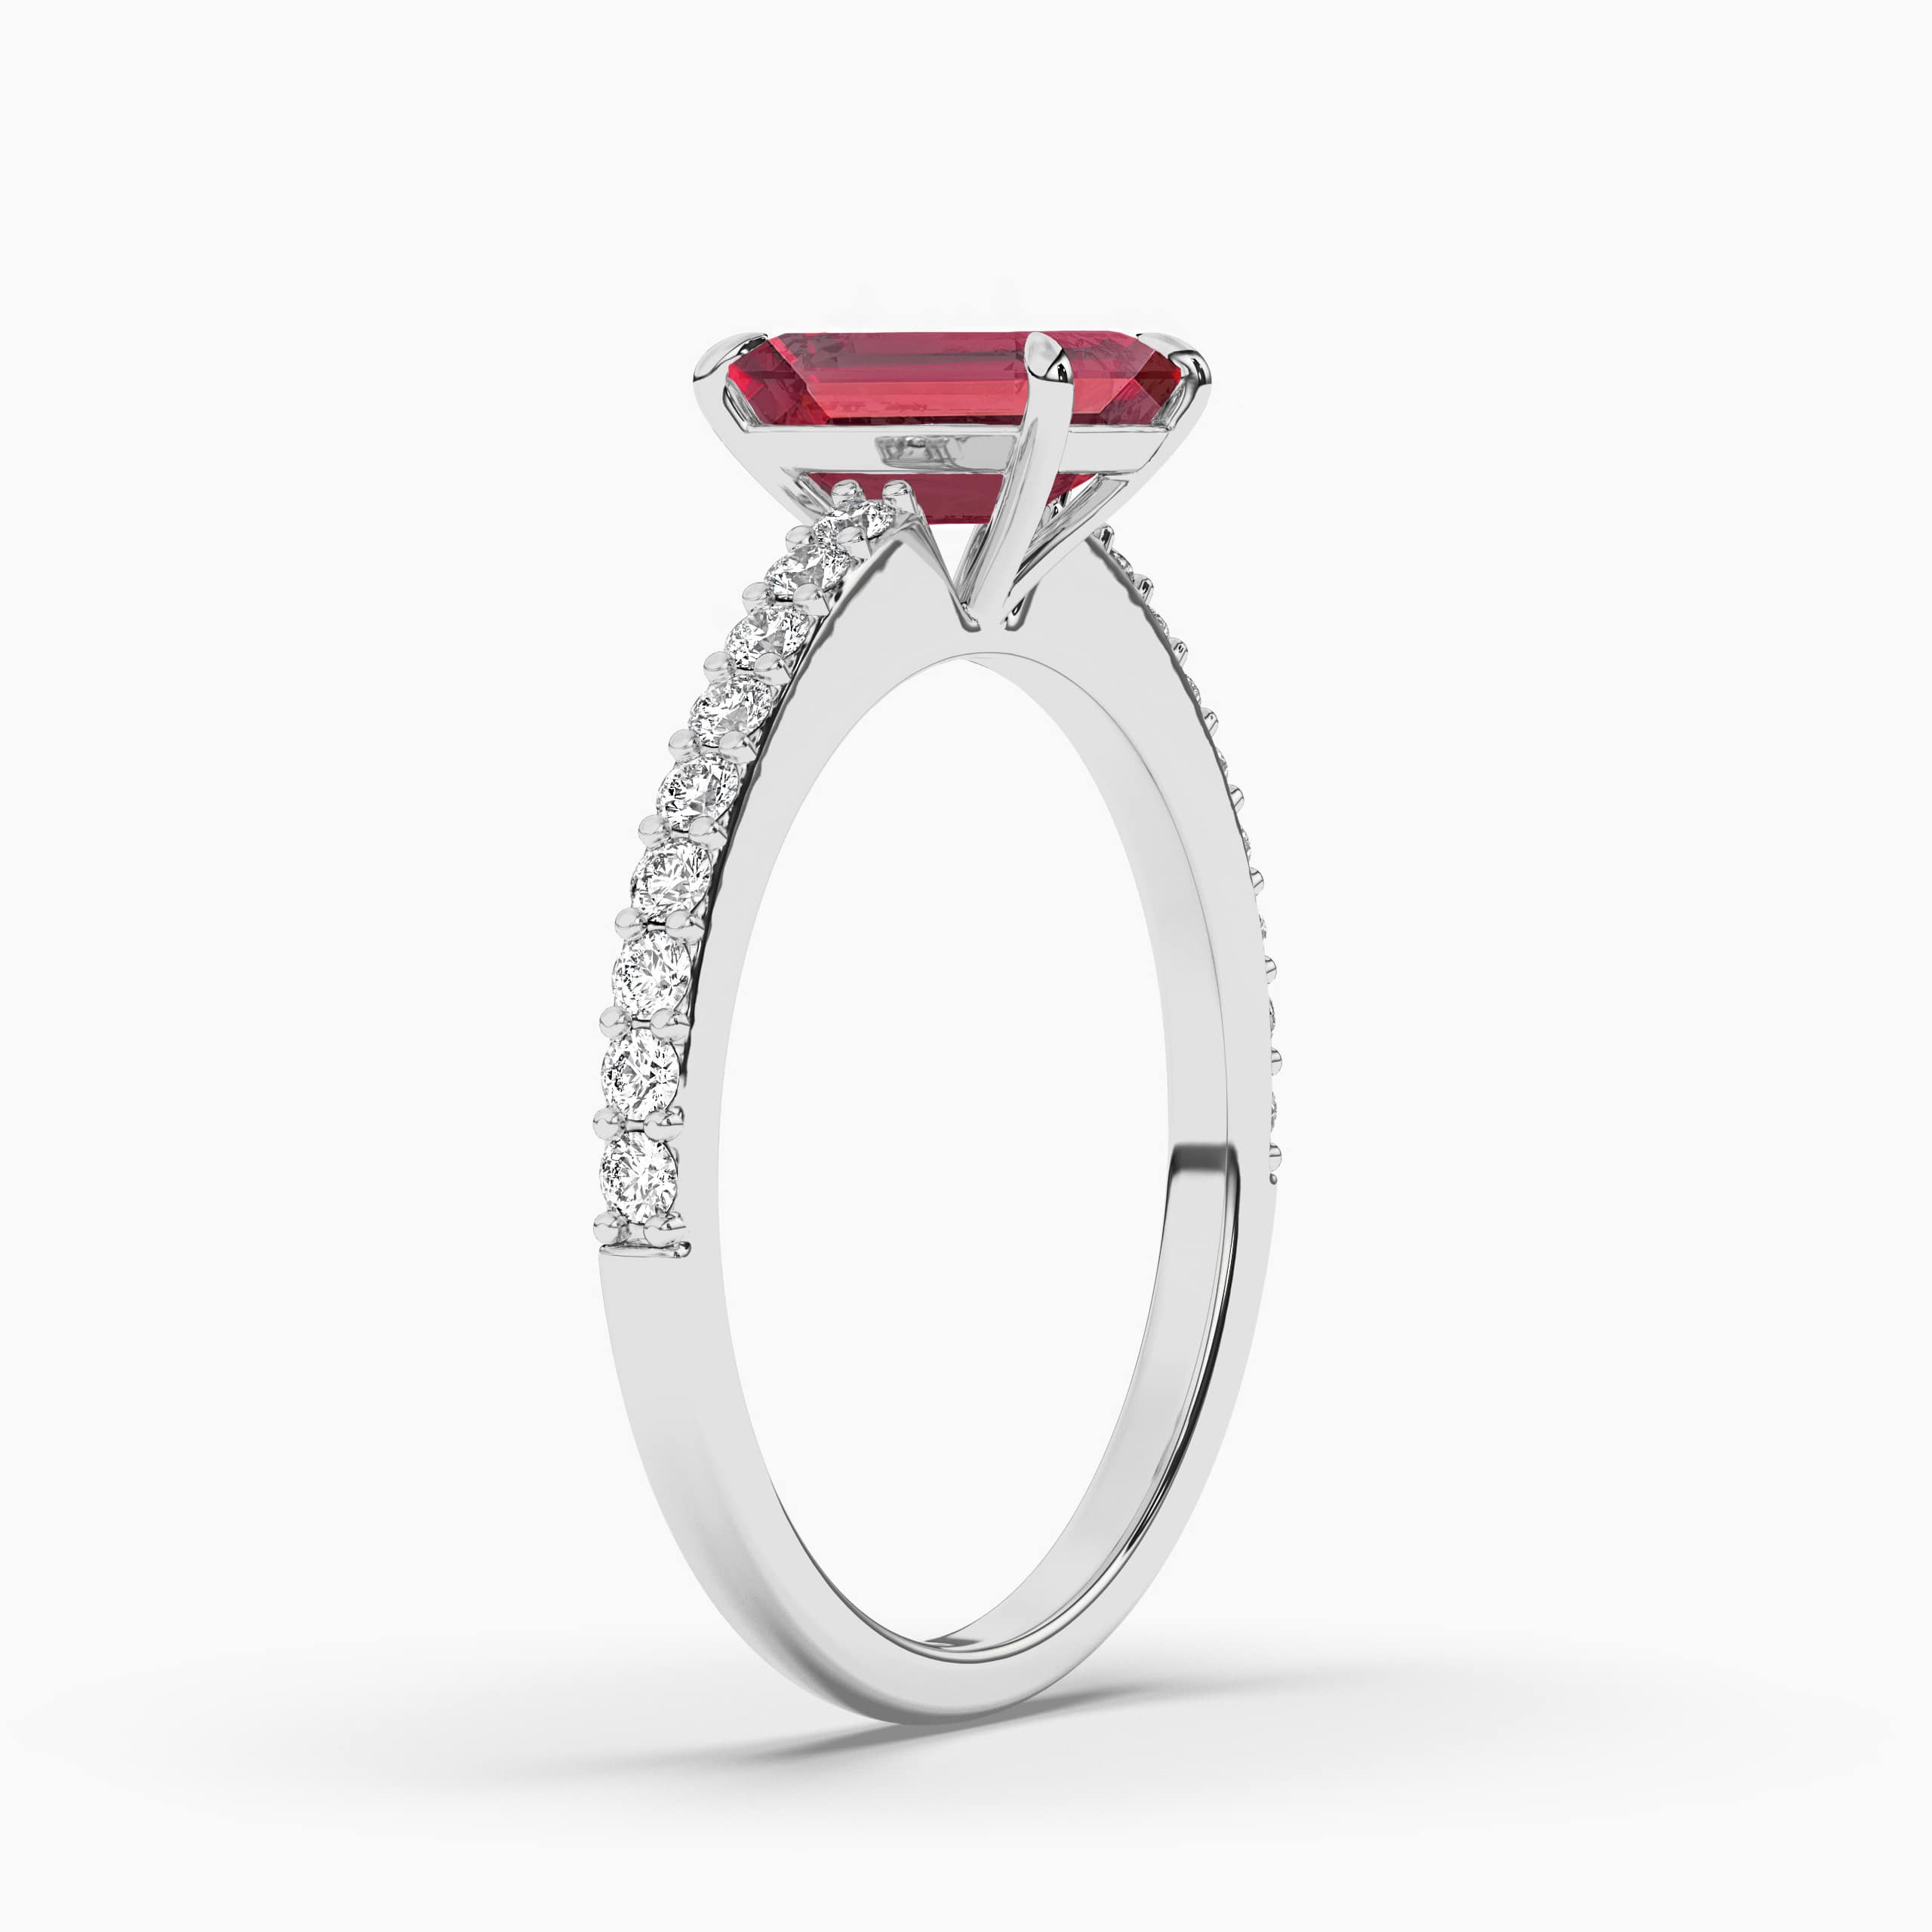 Emerald-Cut Ruby and Diamond Engagement Ring in White Gold